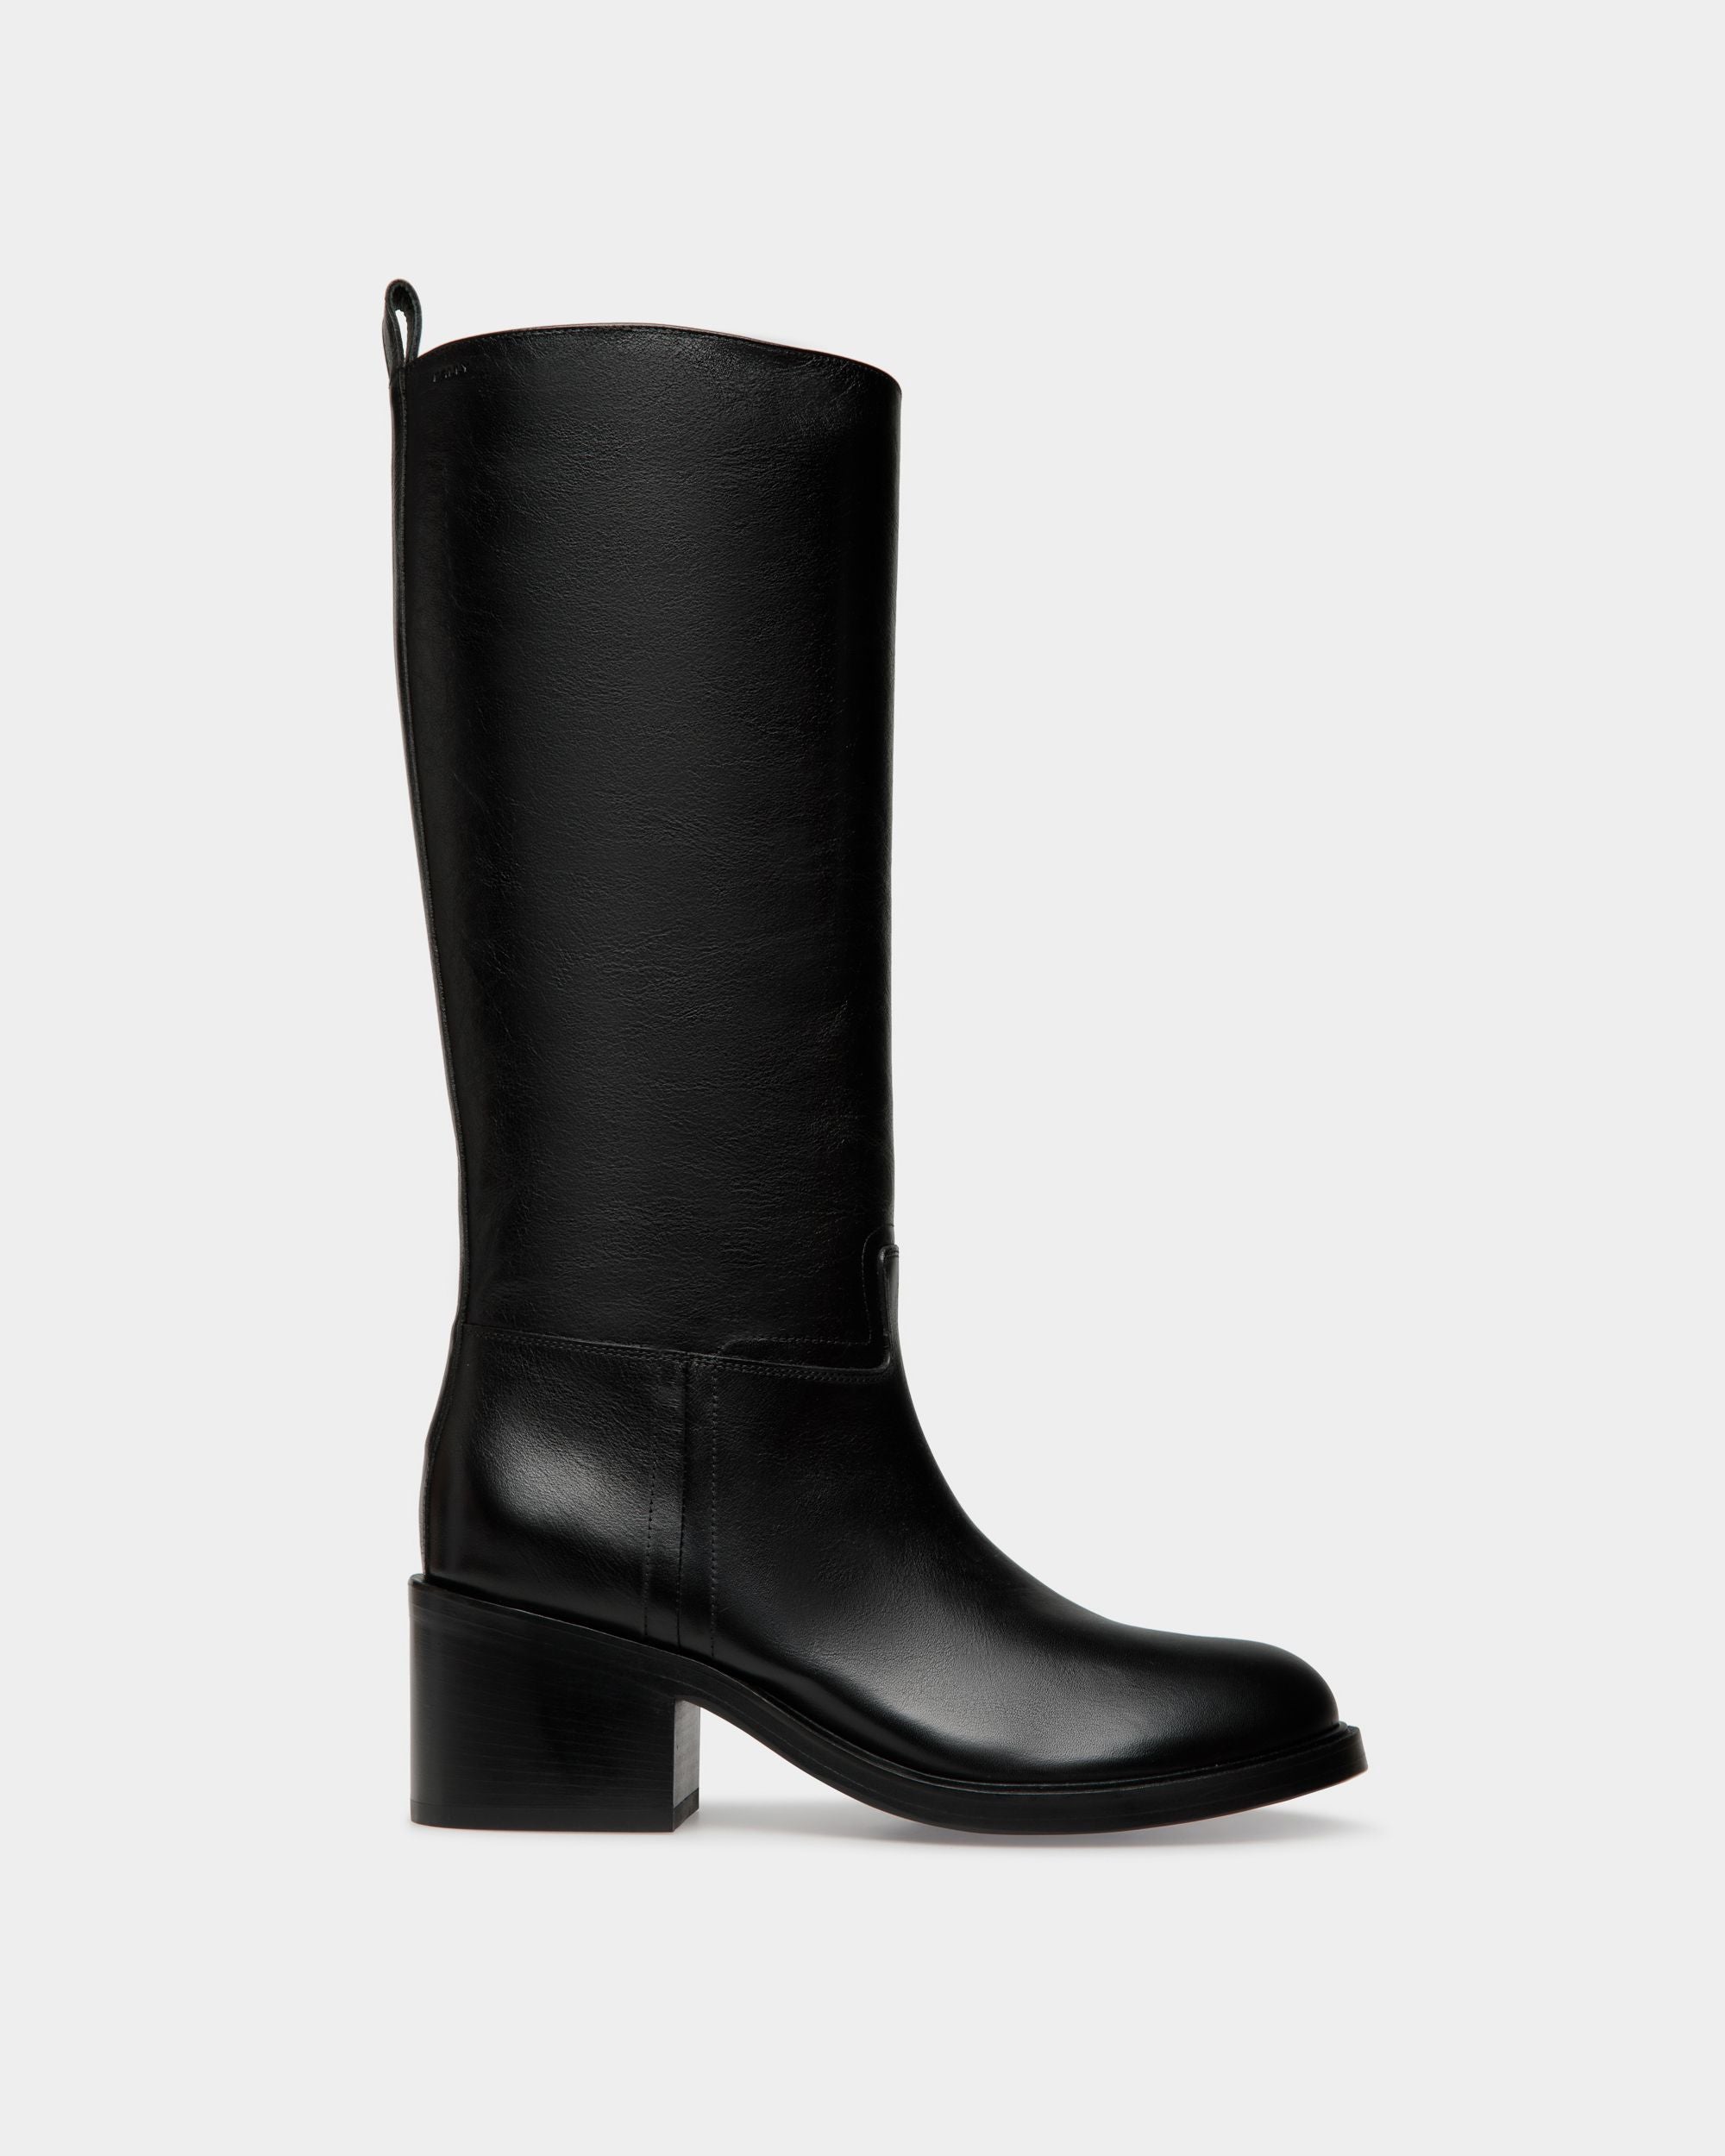 Women's Peggy Boot in Black Leather | Bally | Still Life Side